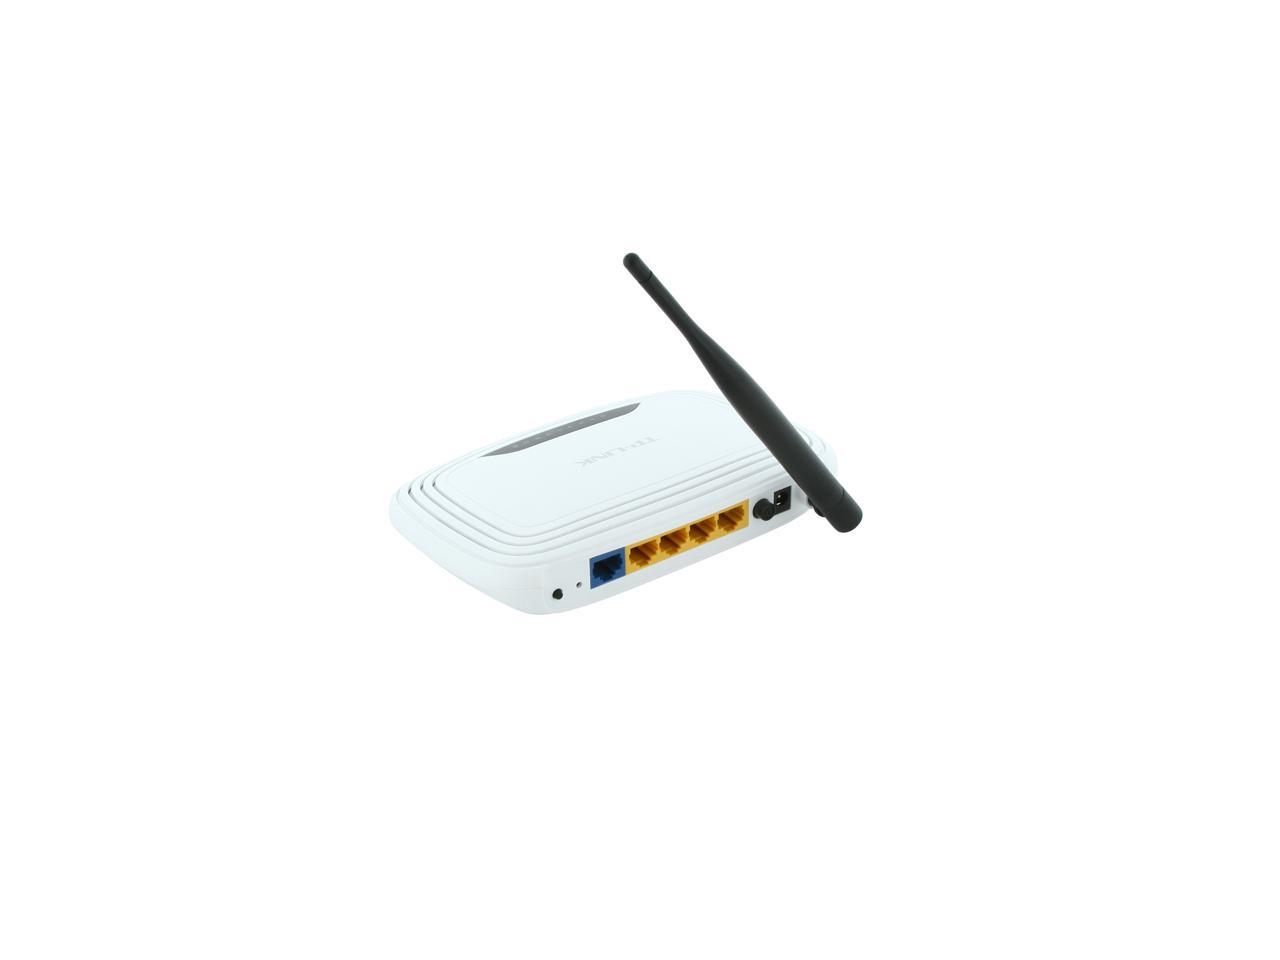 Tp Link Tl Wr740n Wireless Router 80211bgn Up To 150mbps 10100